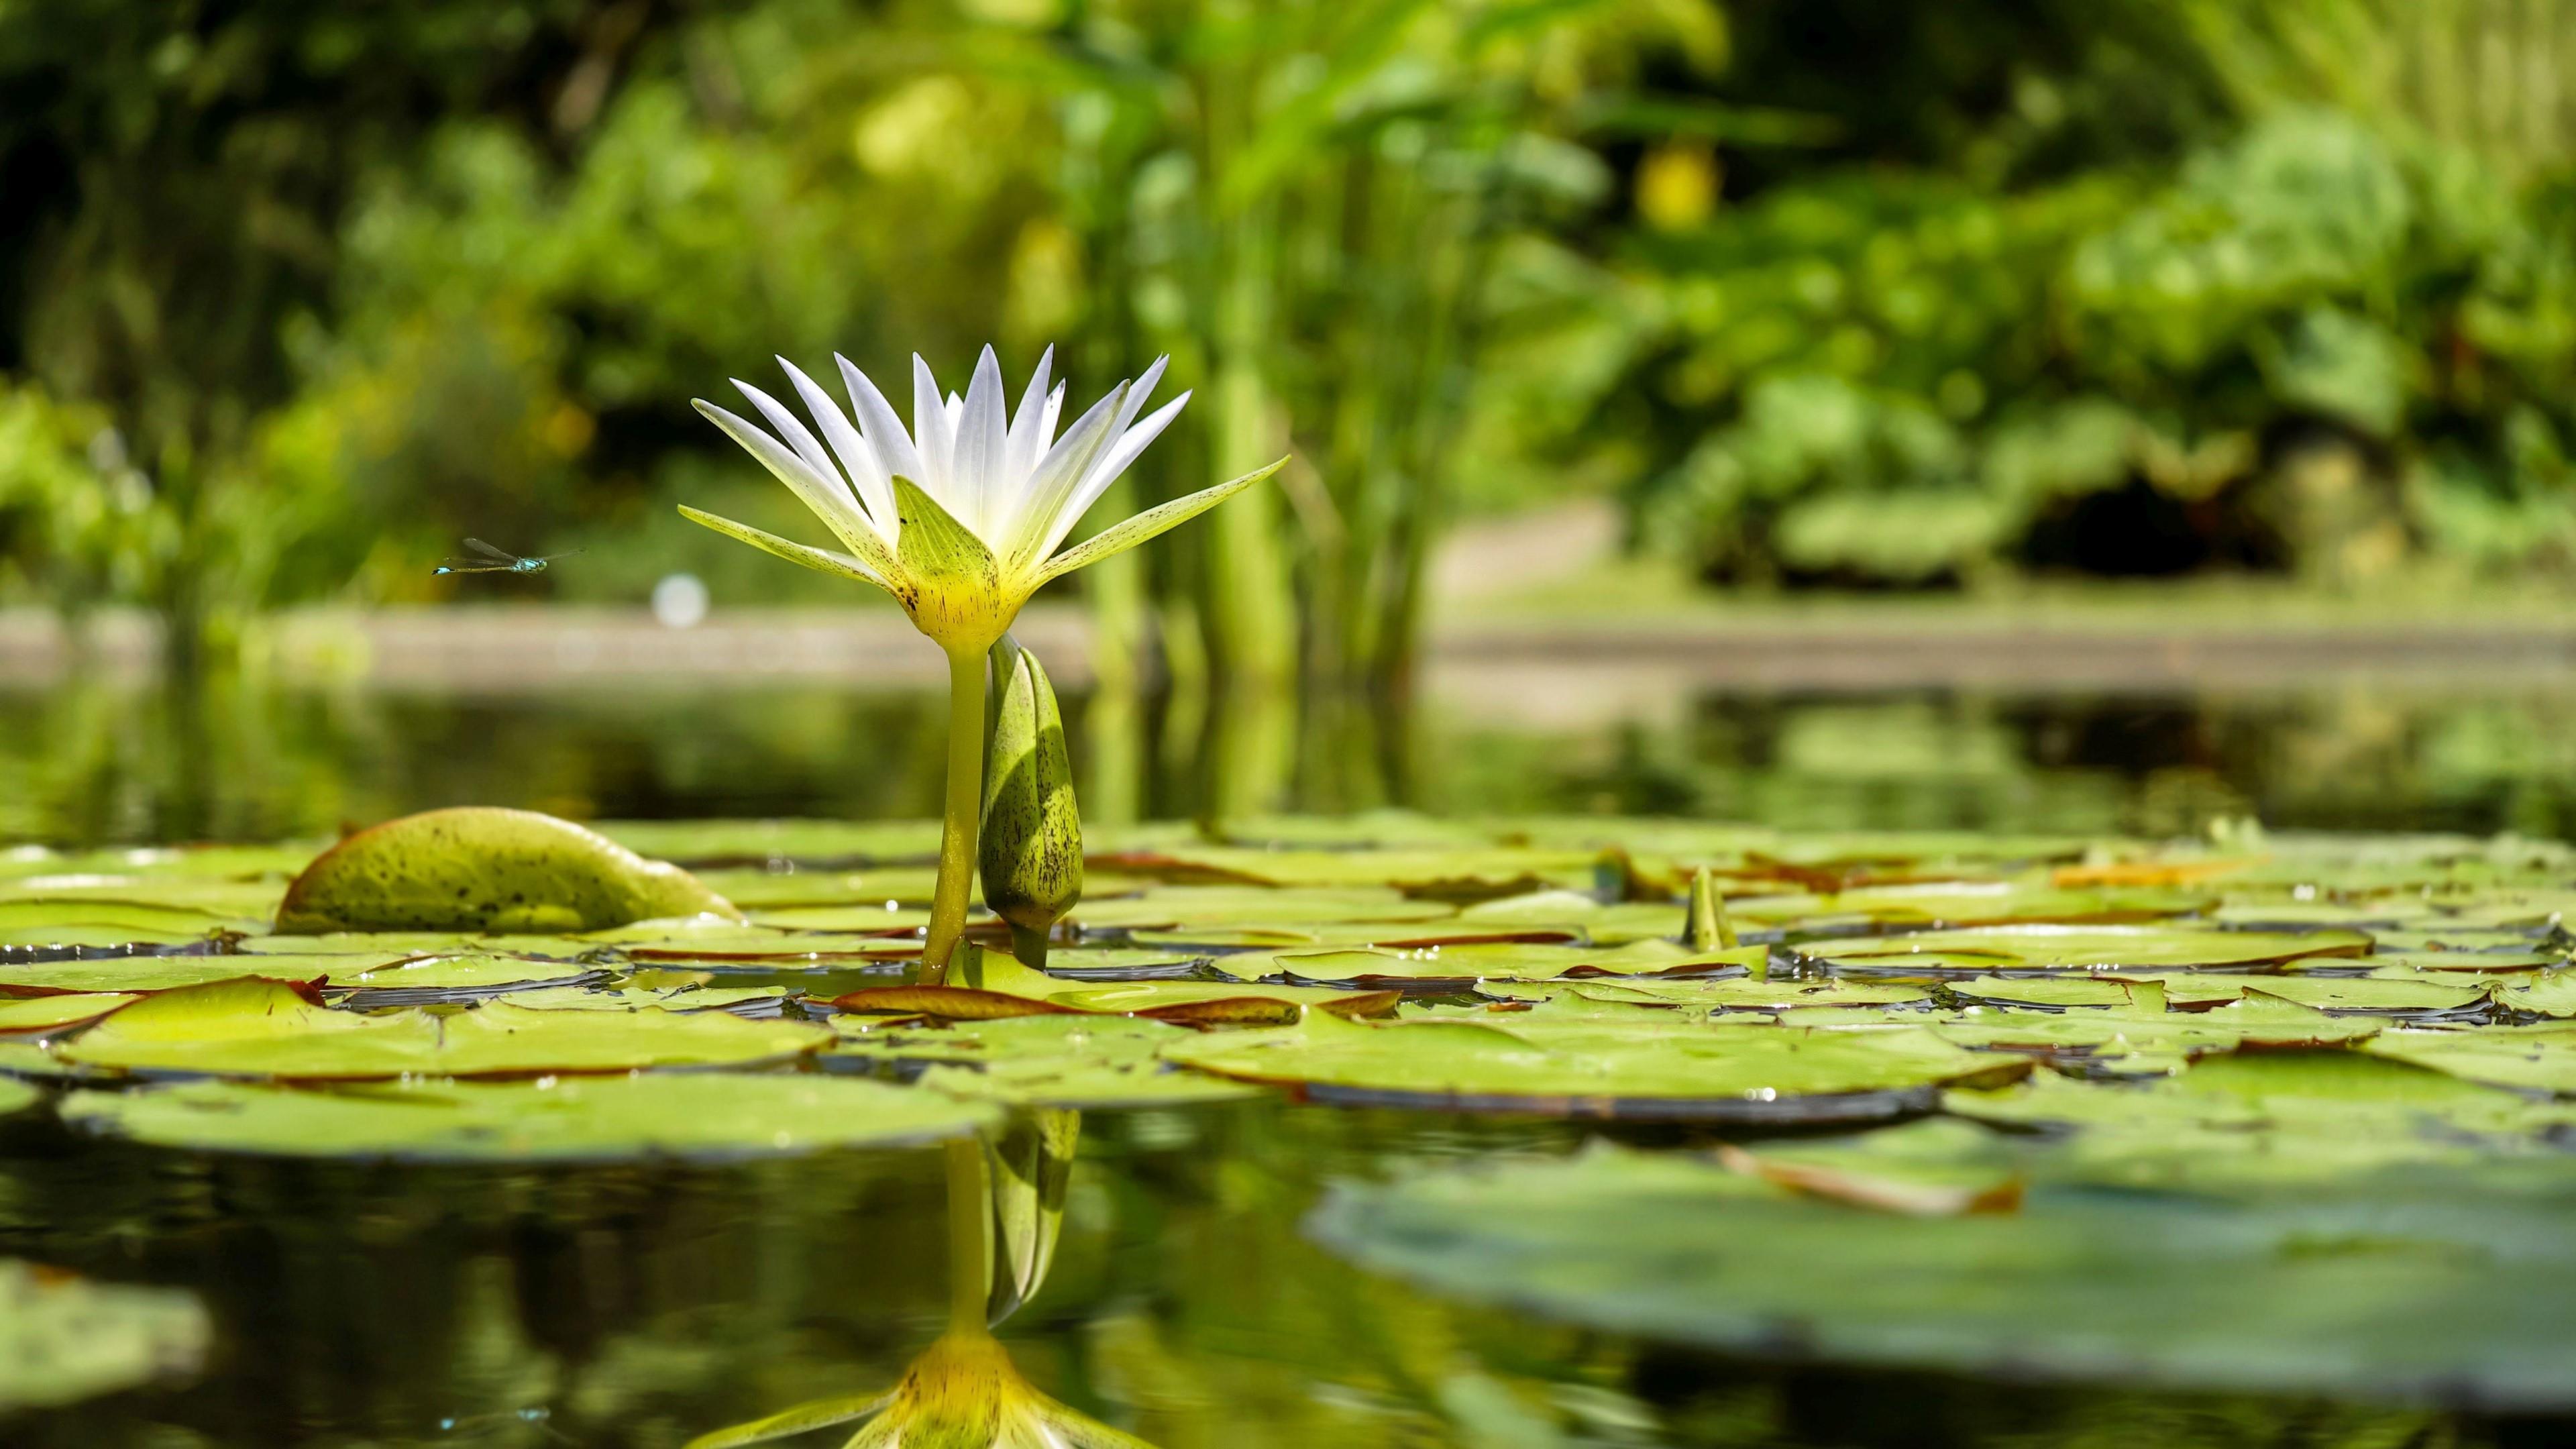 Water Lily Blooming In The Pond Wallpaper | Wallpaper Studio 10 ...